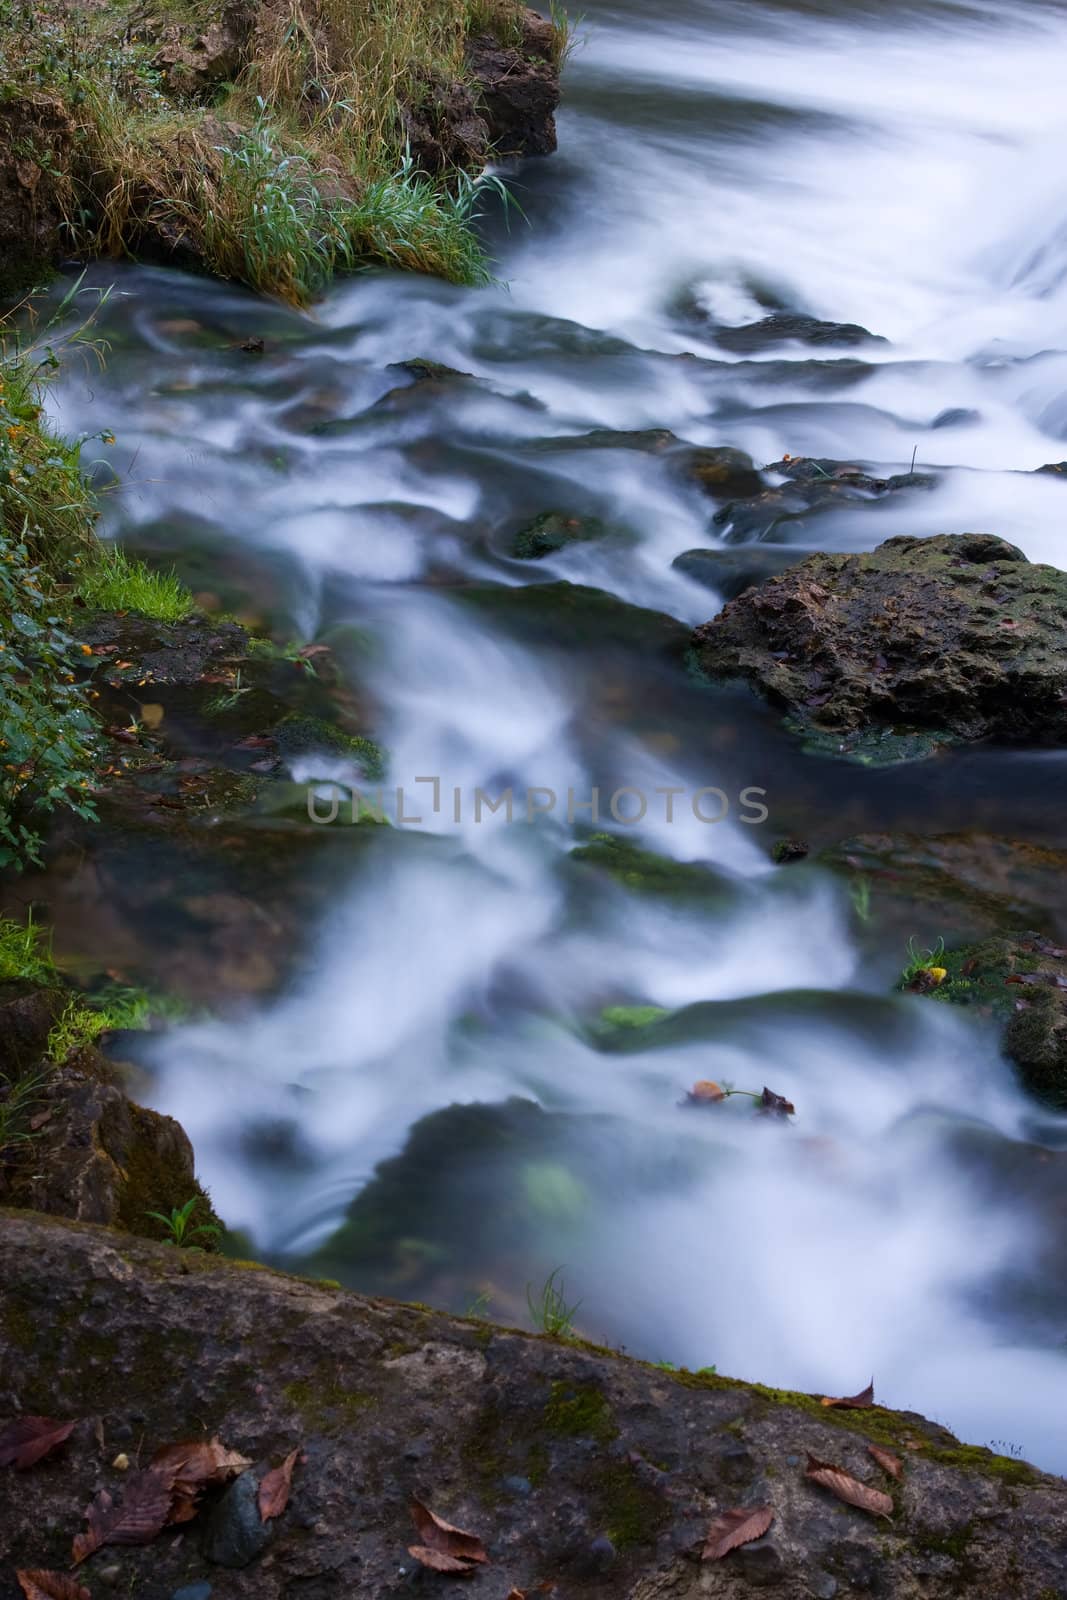 Set of Rapids on a River. by Coffee999